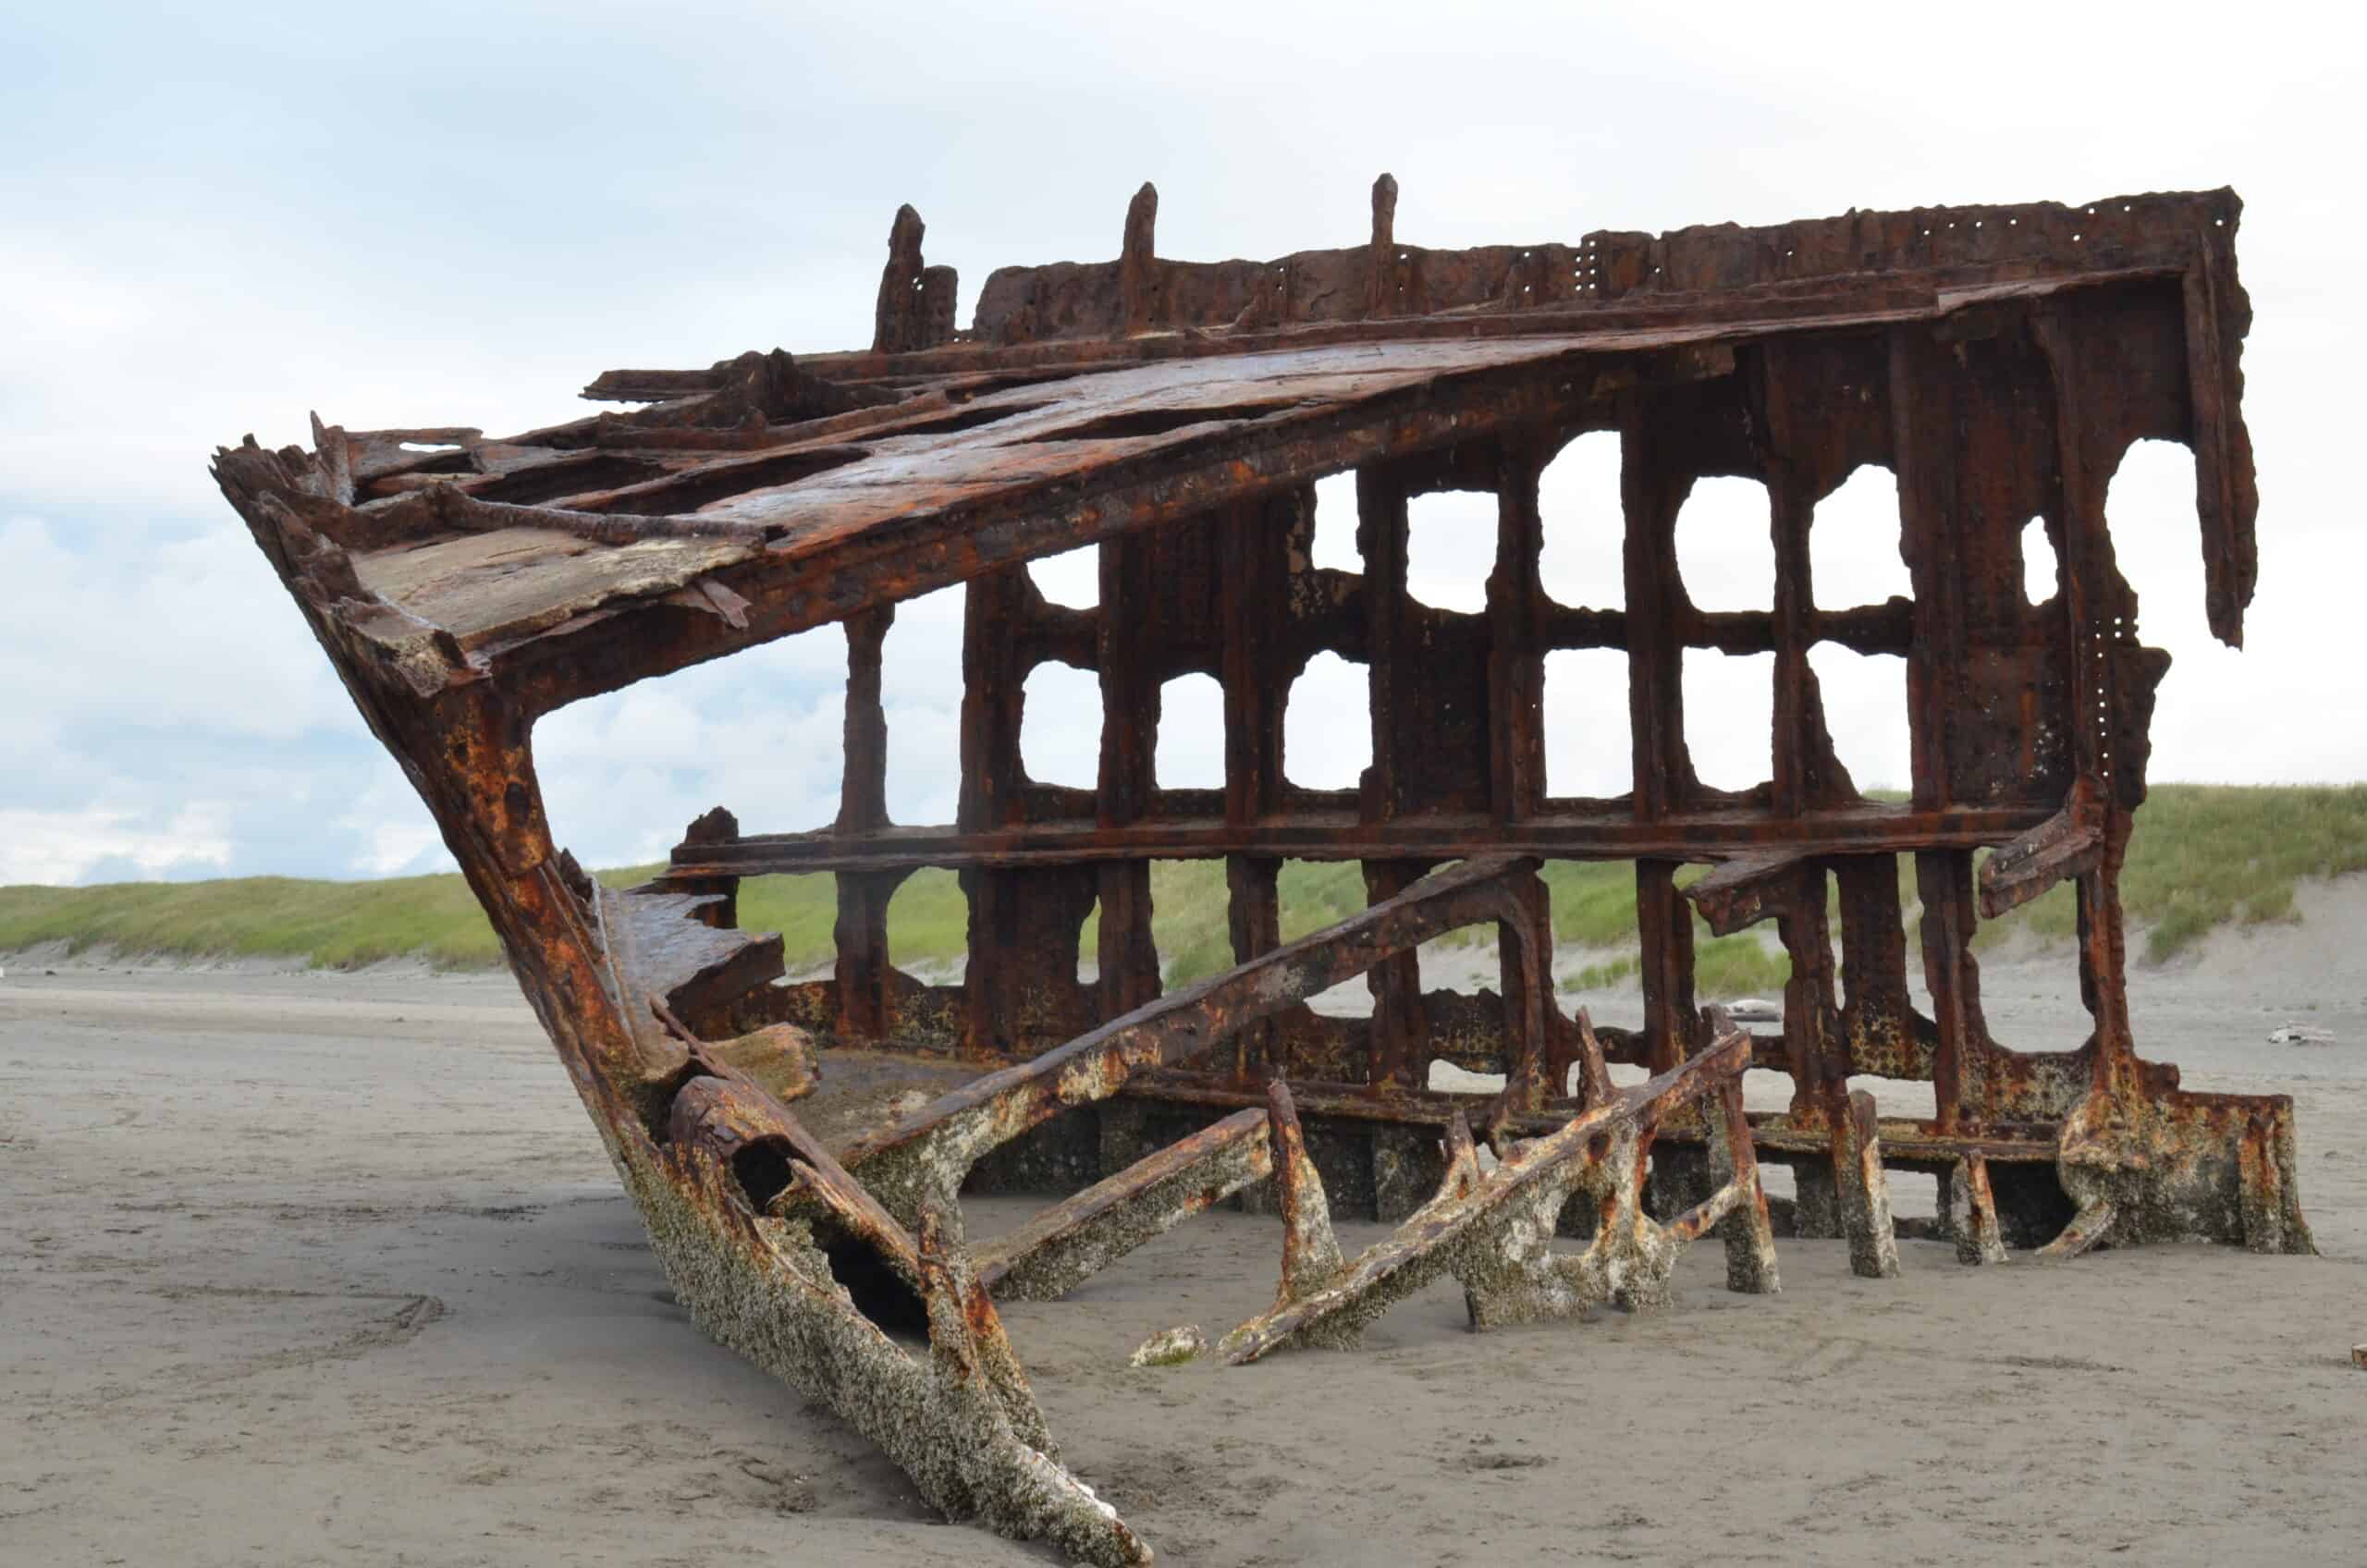 shipwreck of the Peter Iredale